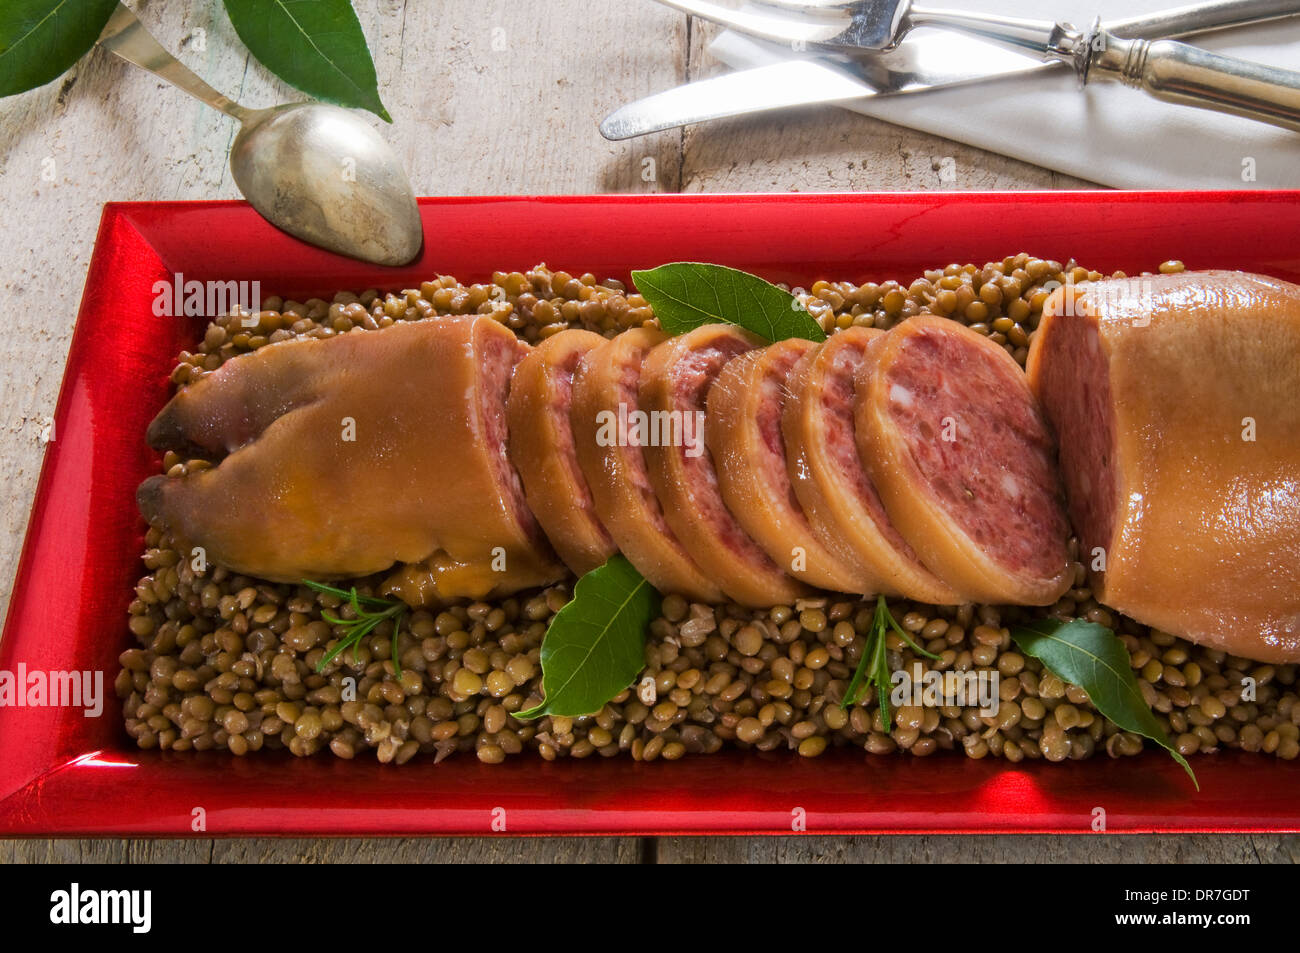 Zampone (boiled and stuffed pig's trotter) on lentils, Italian cooking, Christmas food Stock Photo